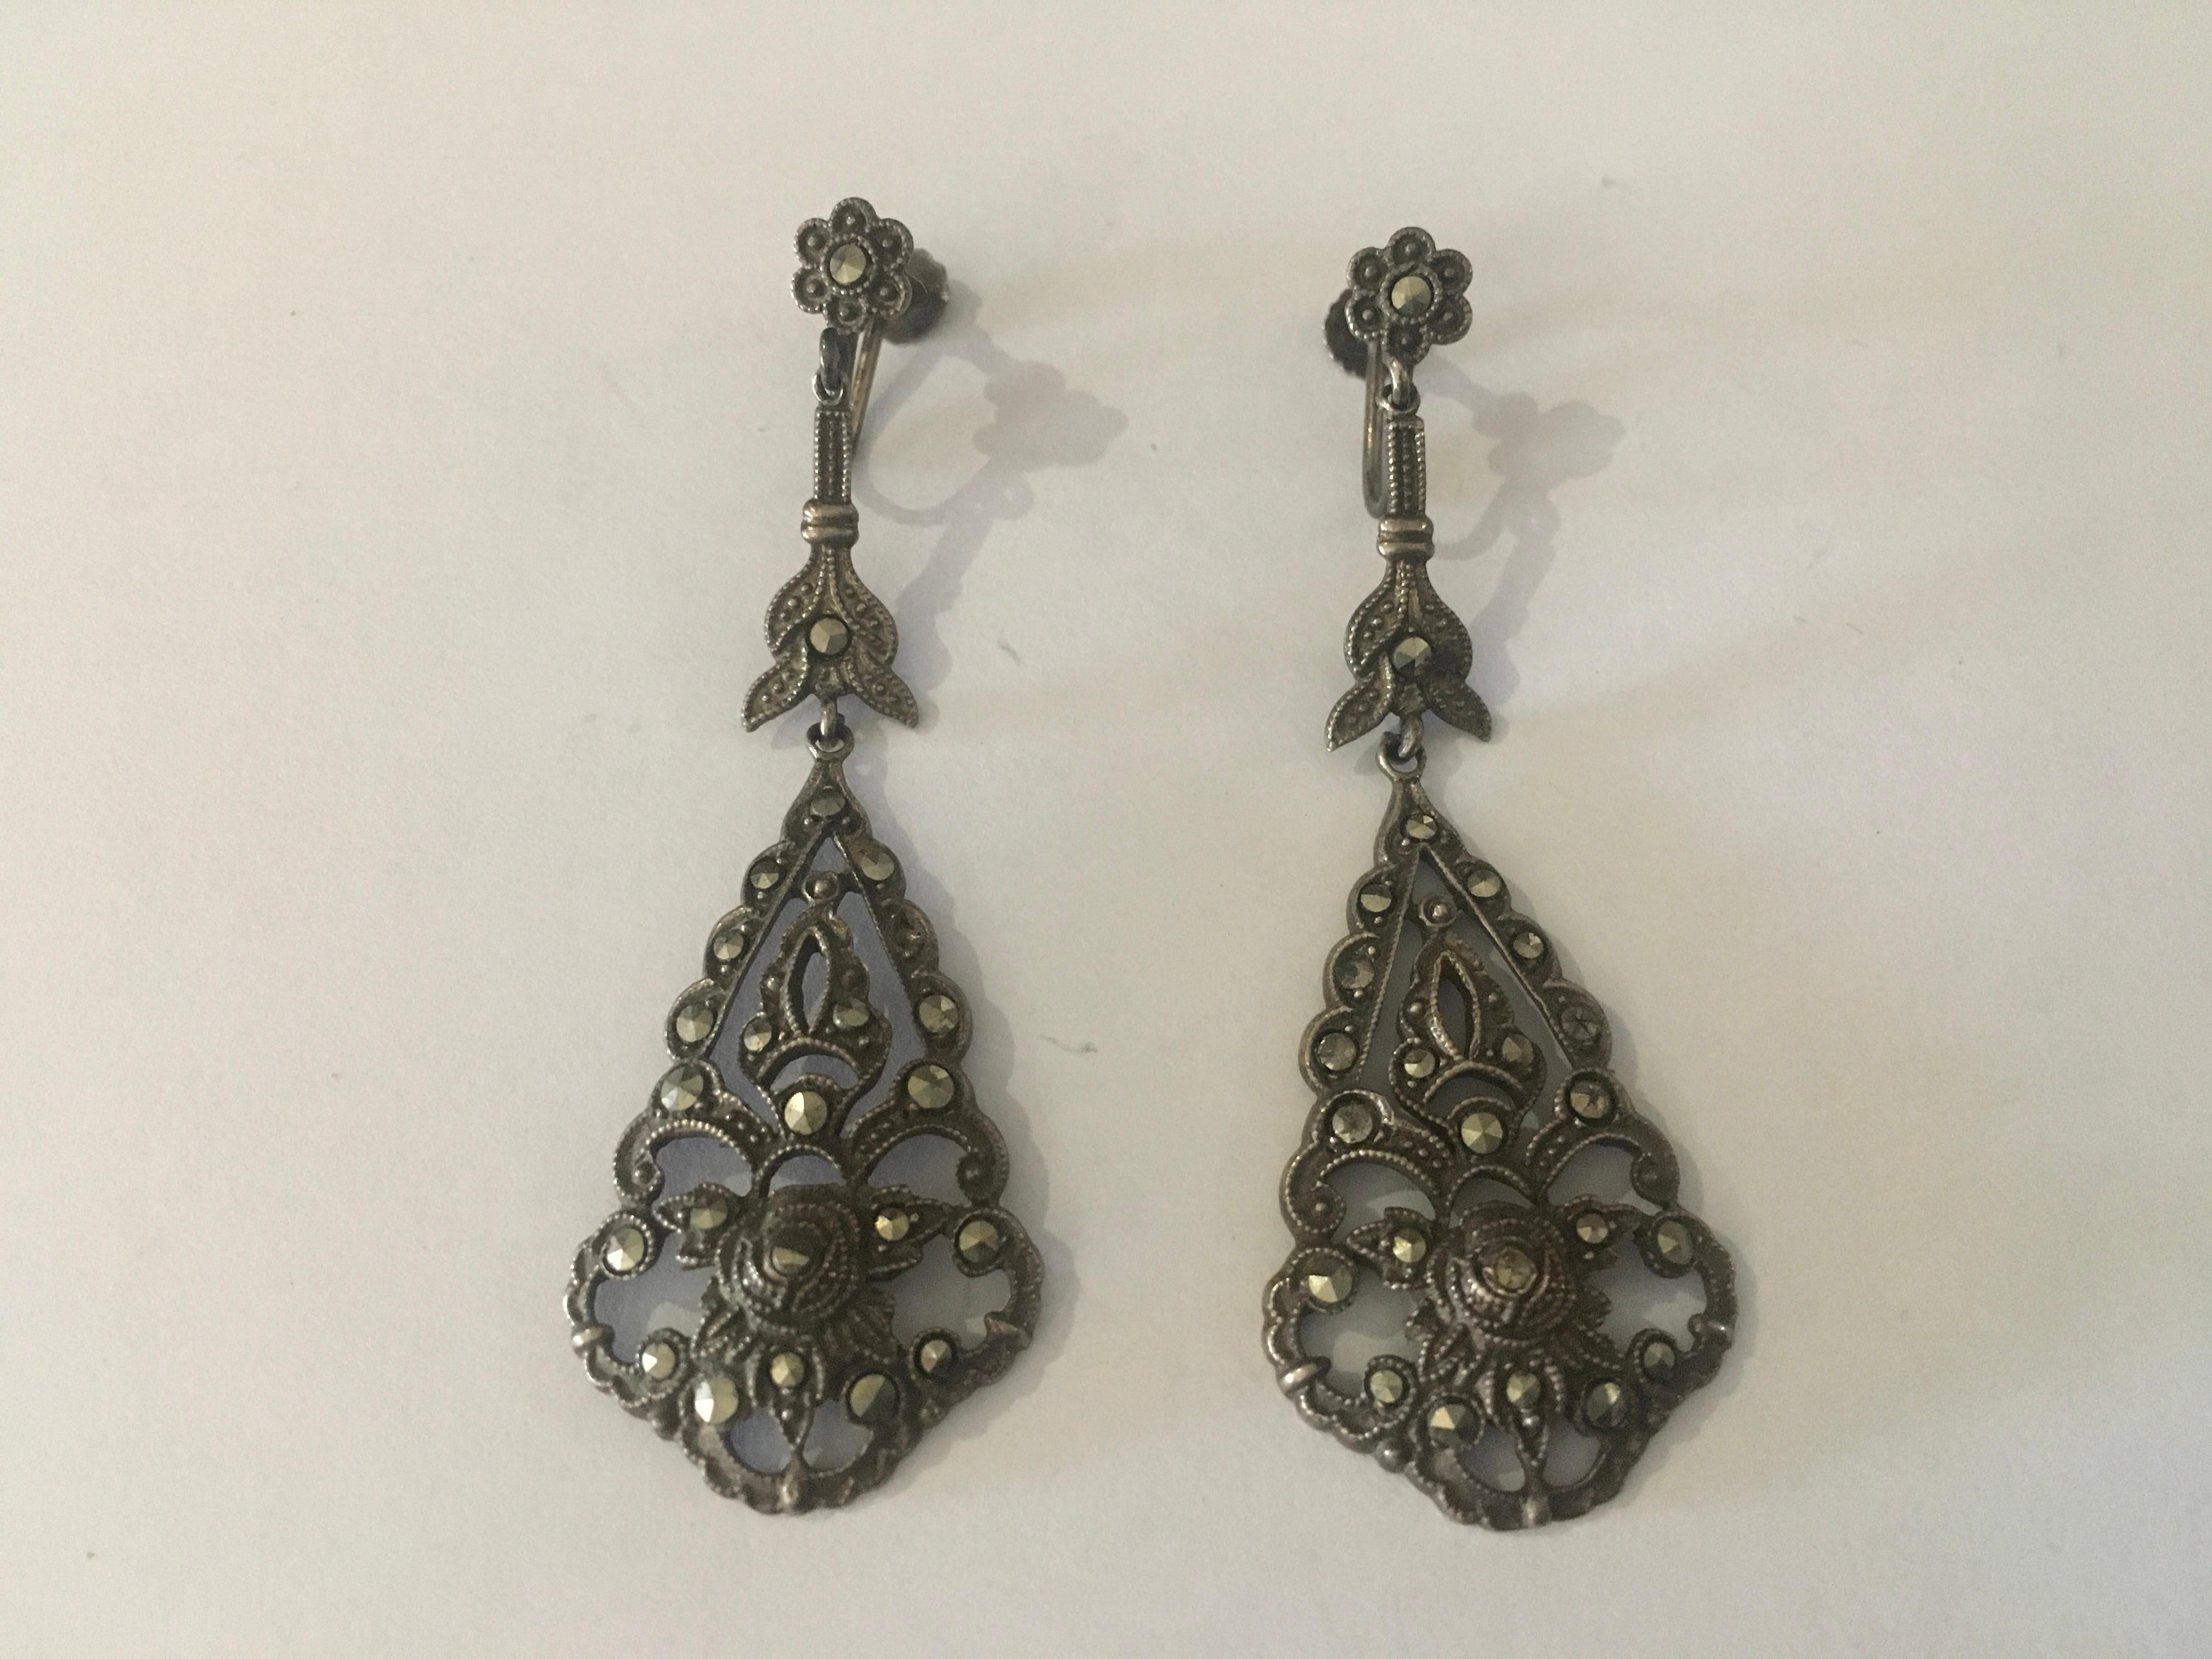 Stunning pair of early 20 th century silver and marcasite screw back drop earrings.
In very good condition no missing stones.
No hallmarks but tests as silver.
These are stunning, very elegant dangly screw back earrings.
Genuine Antique  era